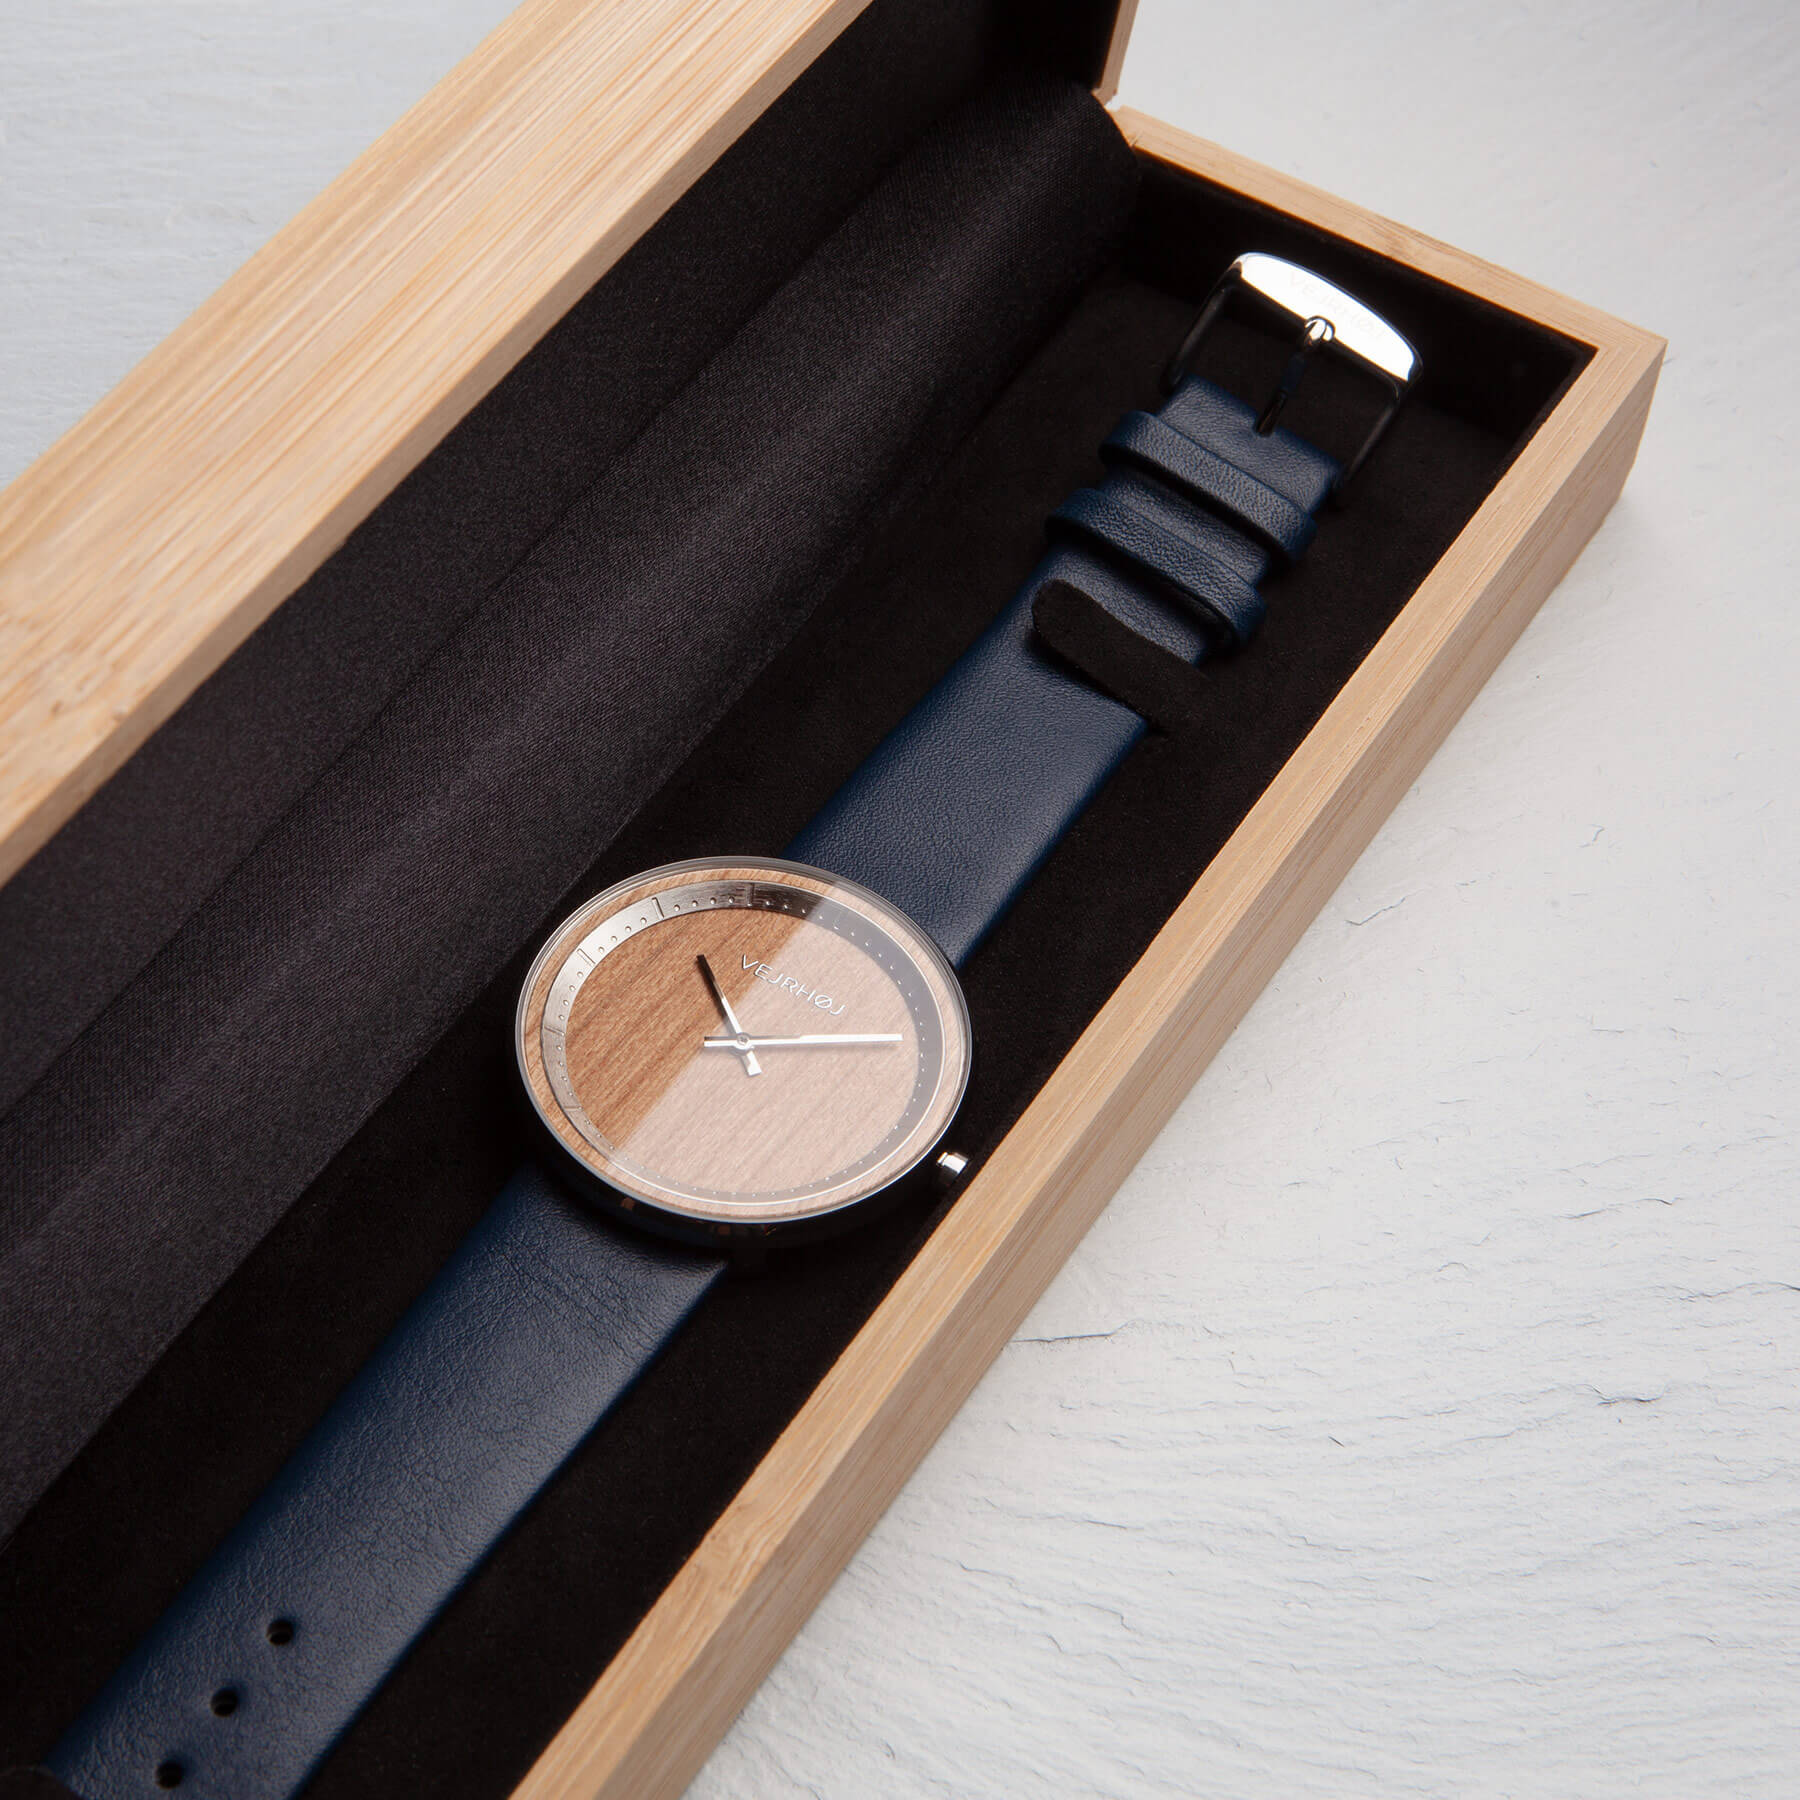 Cherry wood watch with a blue strap